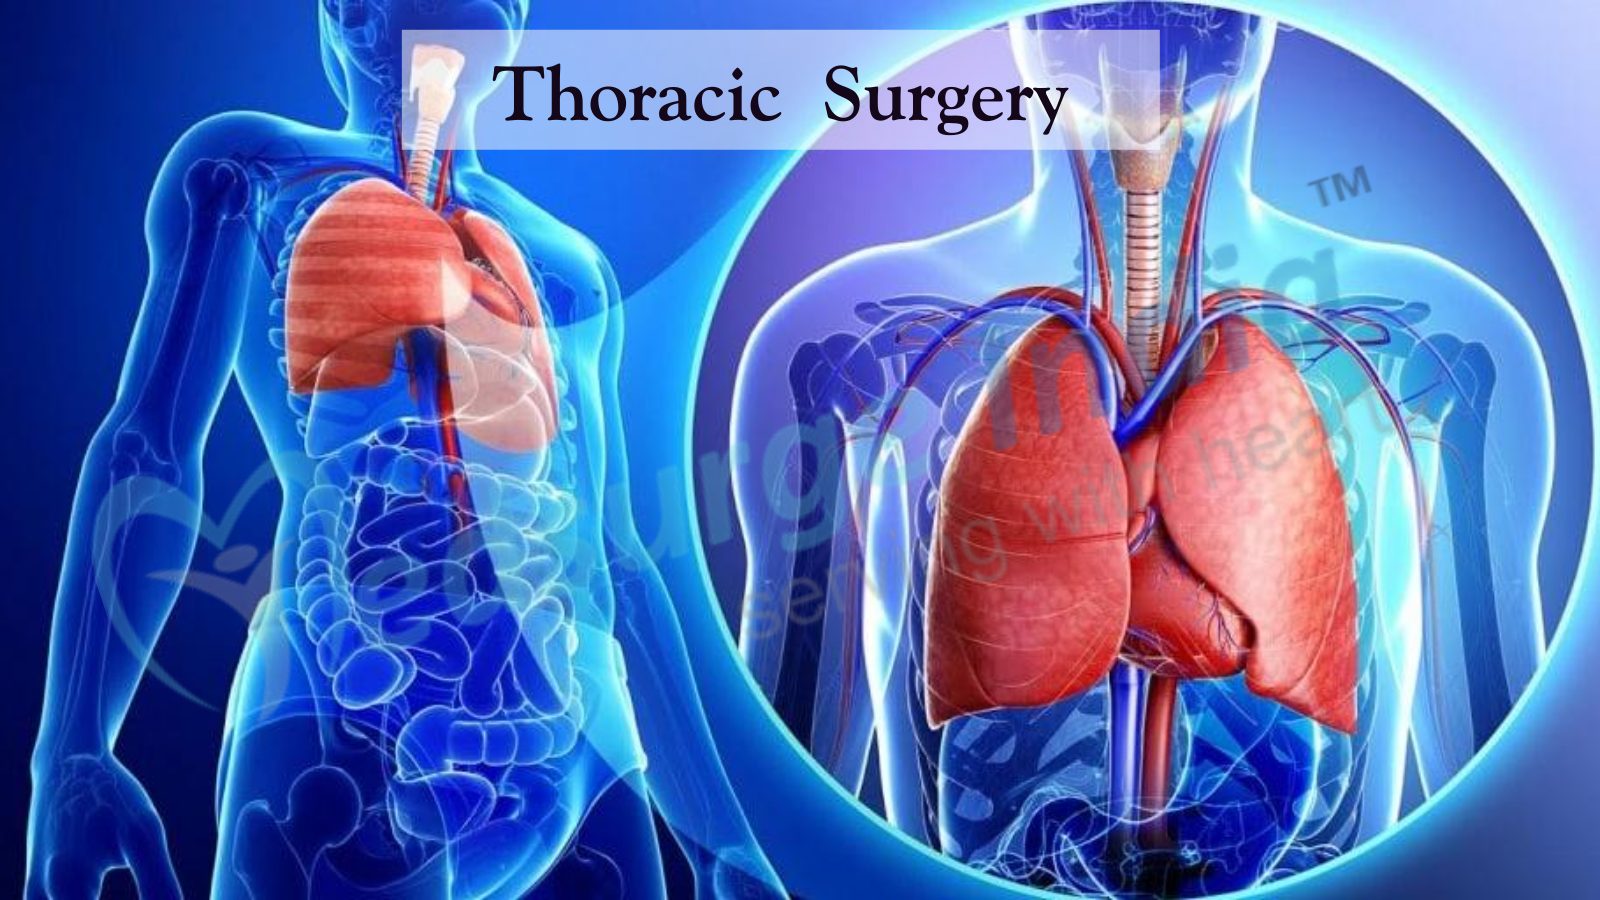 What Is Thoracic Surgery?